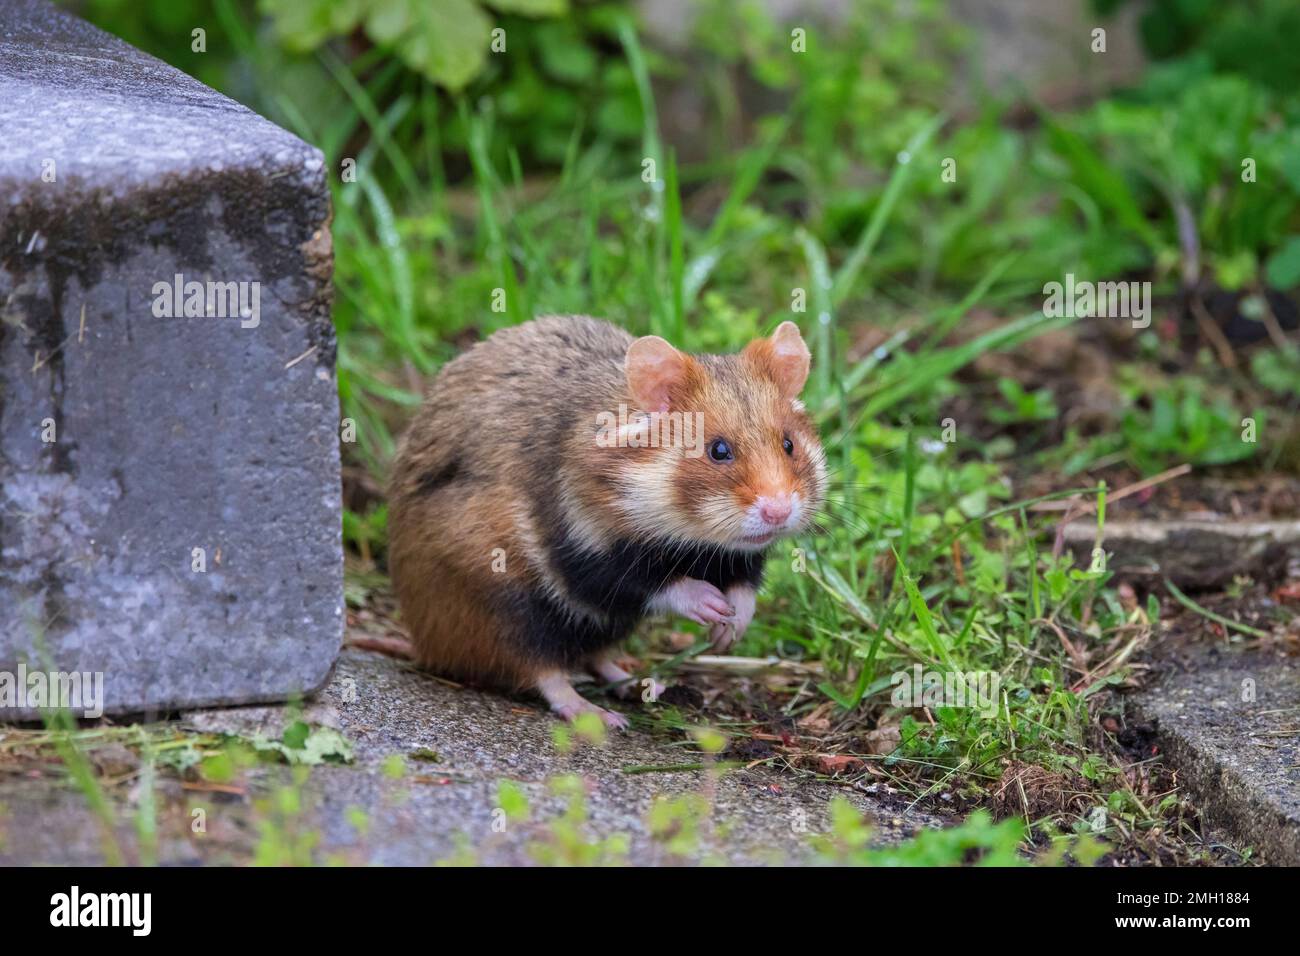 European hamster / Eurasian hamster / common black-bellied hamster (Cricetus cricetus) foraging among graves at the Vienna Central Cemetery, Austria Stock Photo